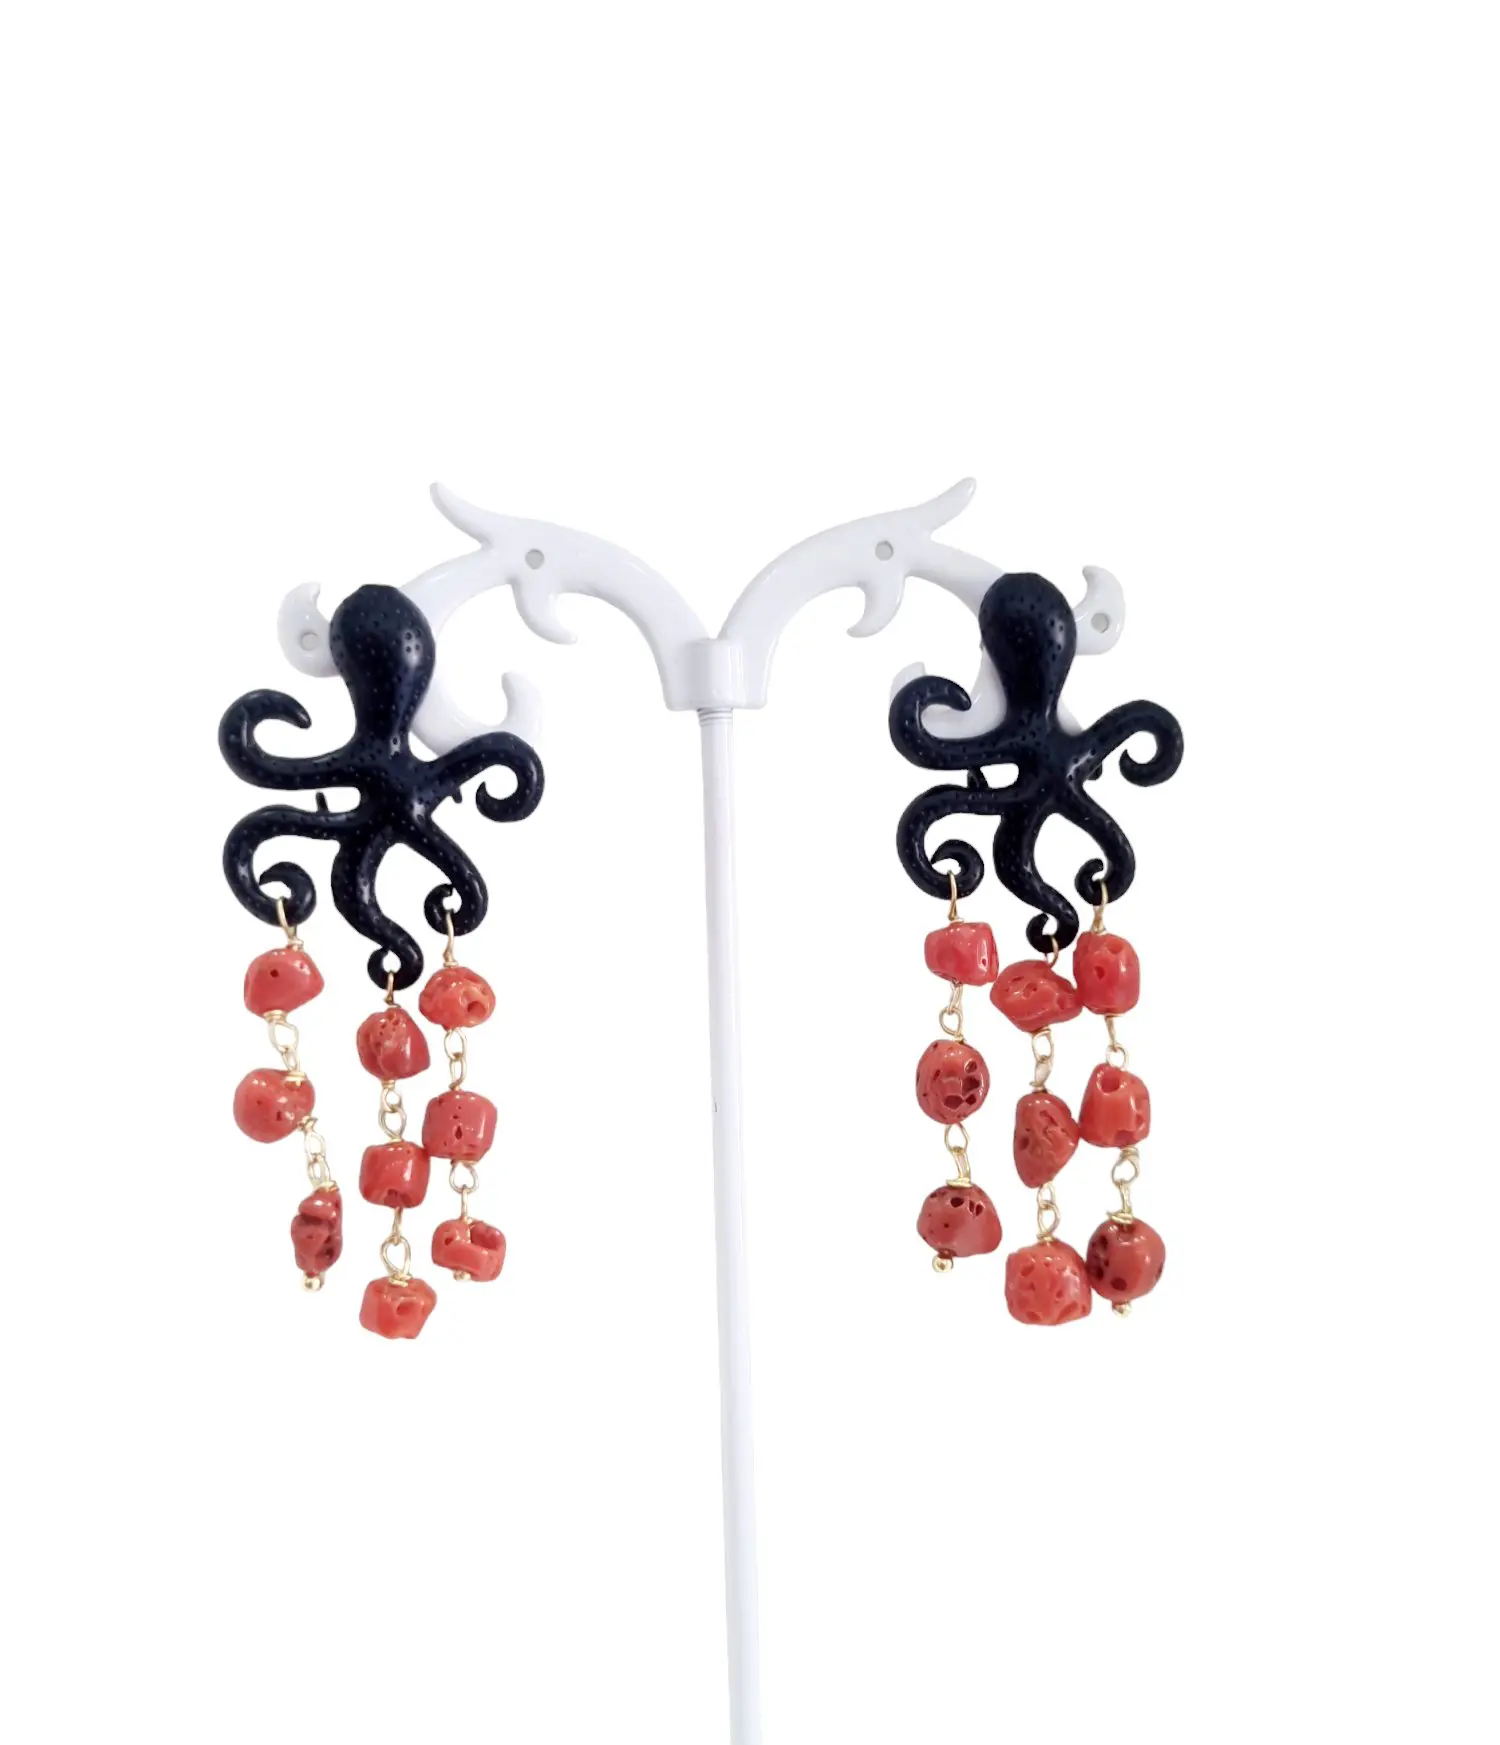 Earrings made with black enamelled octopus and coral pebbles. Weight 6.6g Length 6cm